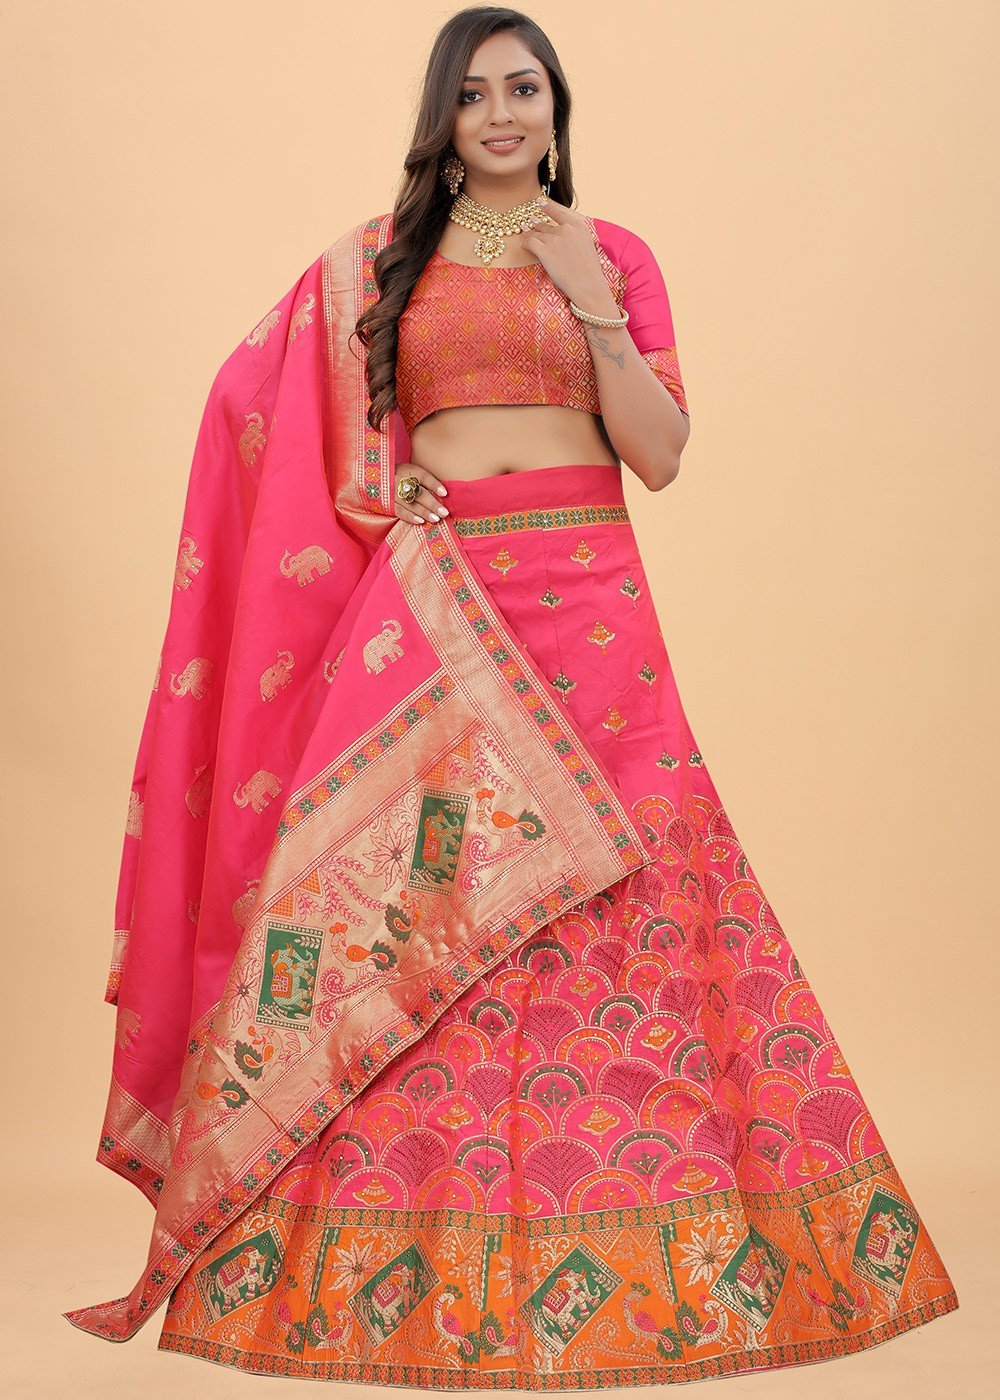 5 Trends and 6 Reasons to Rock the Banarasi Lehenga on Your D-day